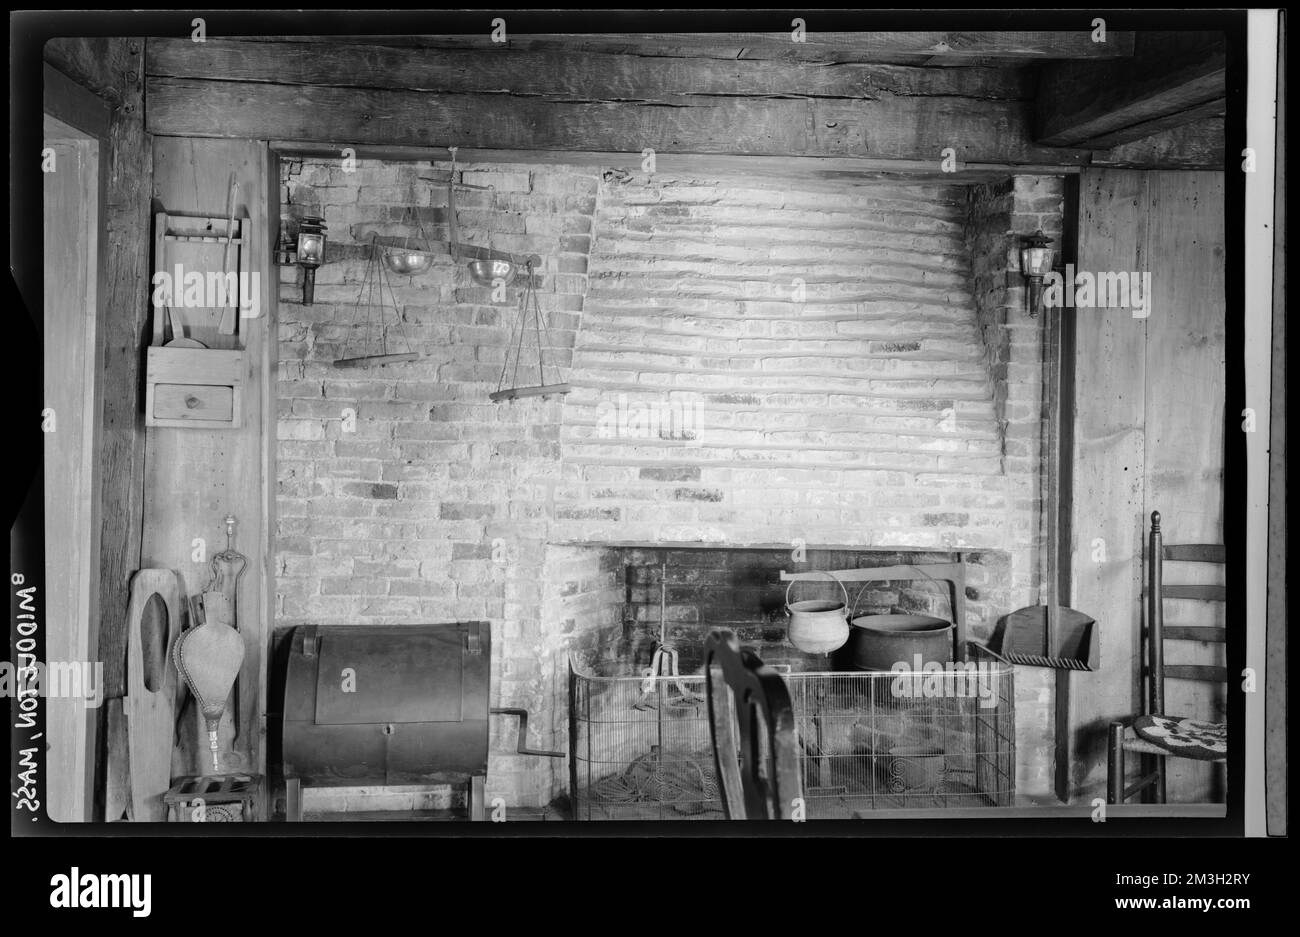 Middleton, fireplace of an unidentified house , Interiors, Fireplaces. Samuel Chamberlain Photograph Negatives Collection Stock Photo